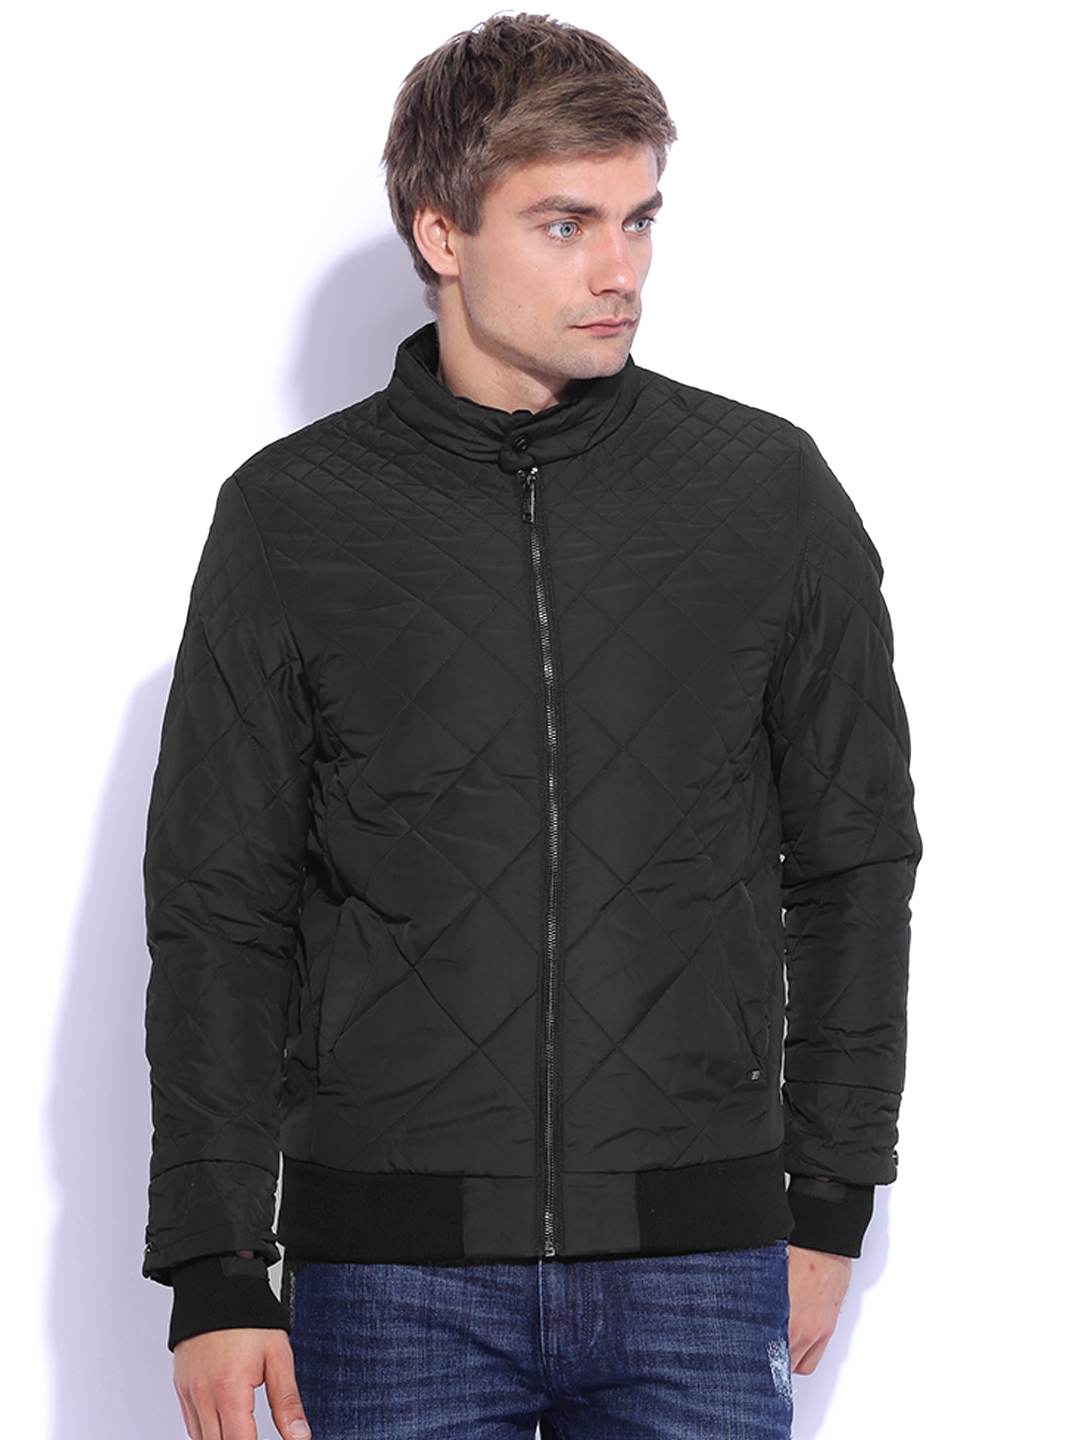 Buy Arrow New York Black Quilted Jacket - Jackets for Men 976273 | Myntra